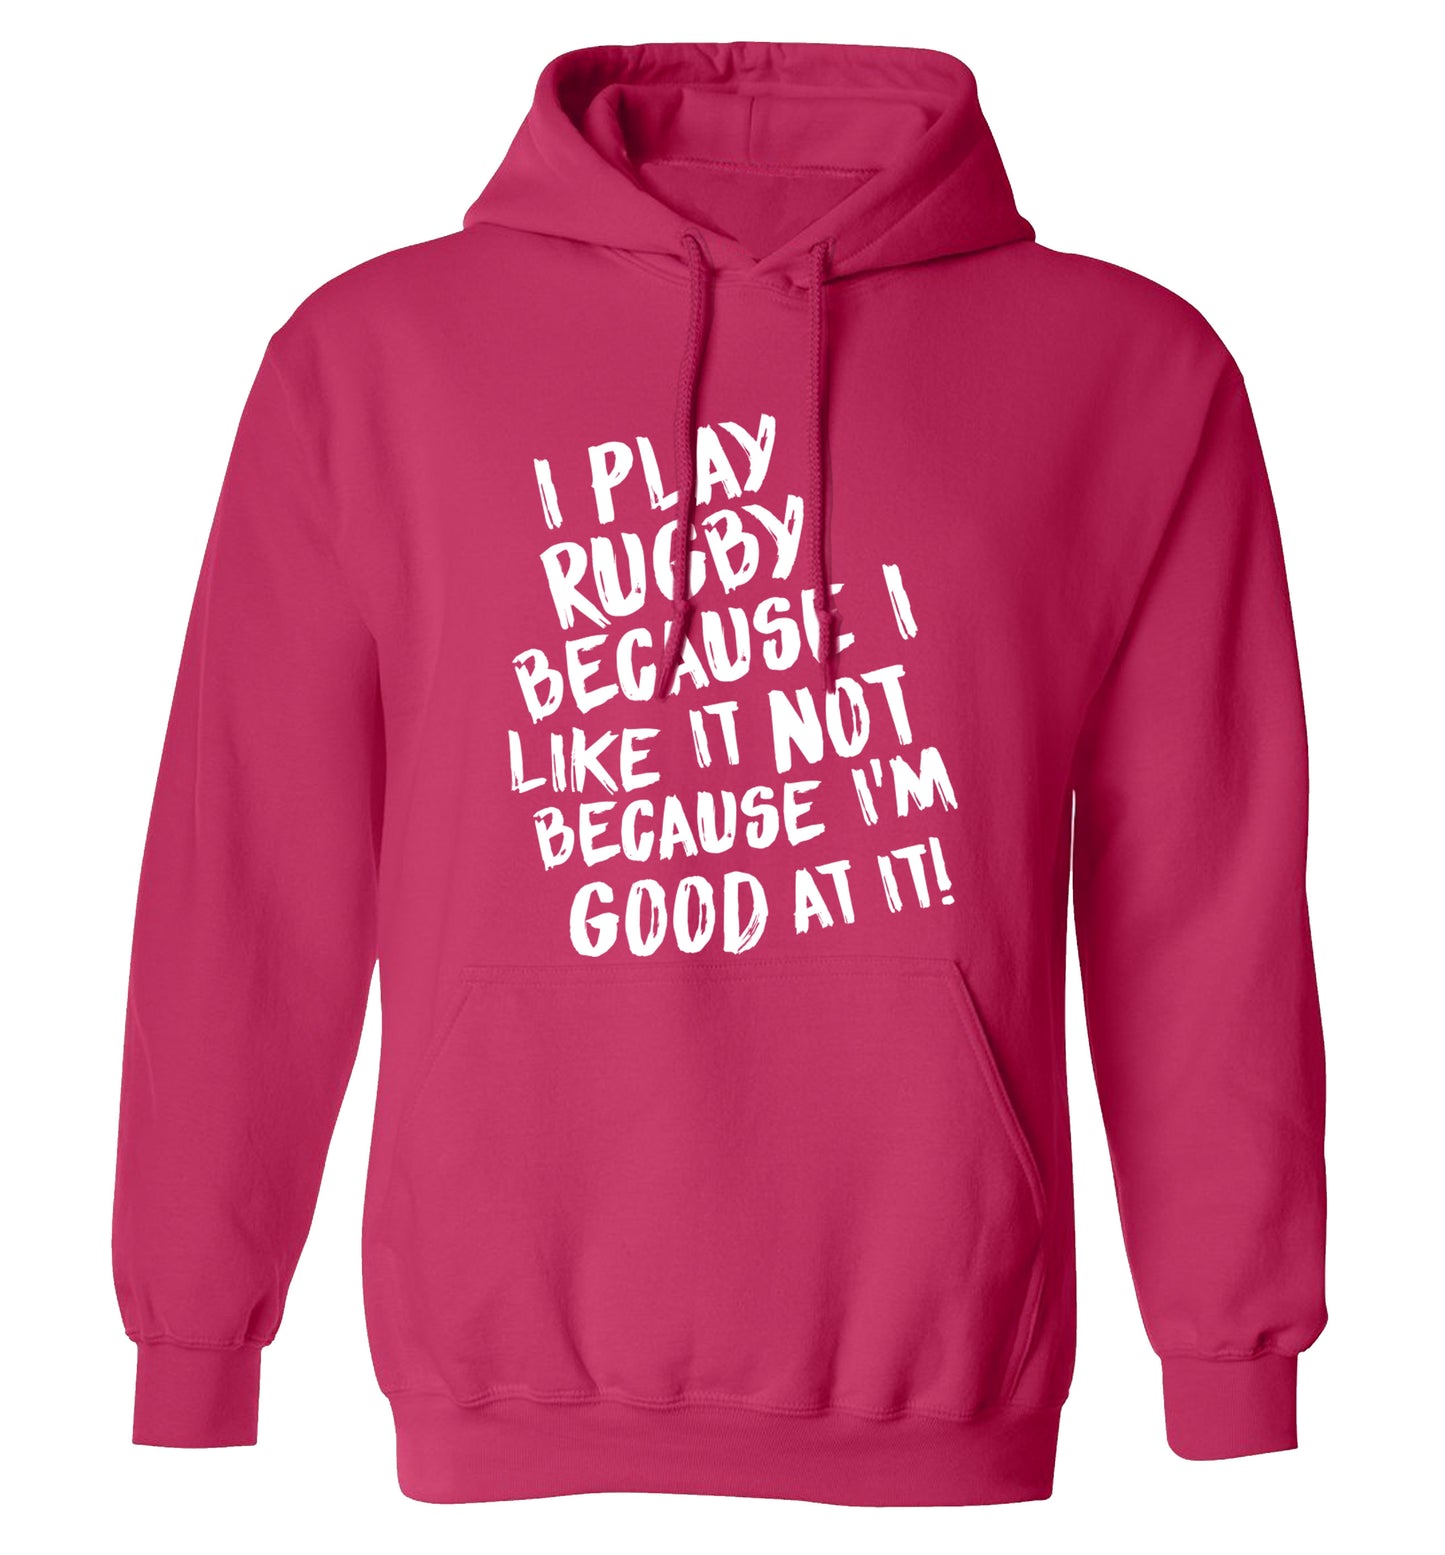 I play rugby because I like it not because I'm good at it adults unisex pink hoodie 2XL